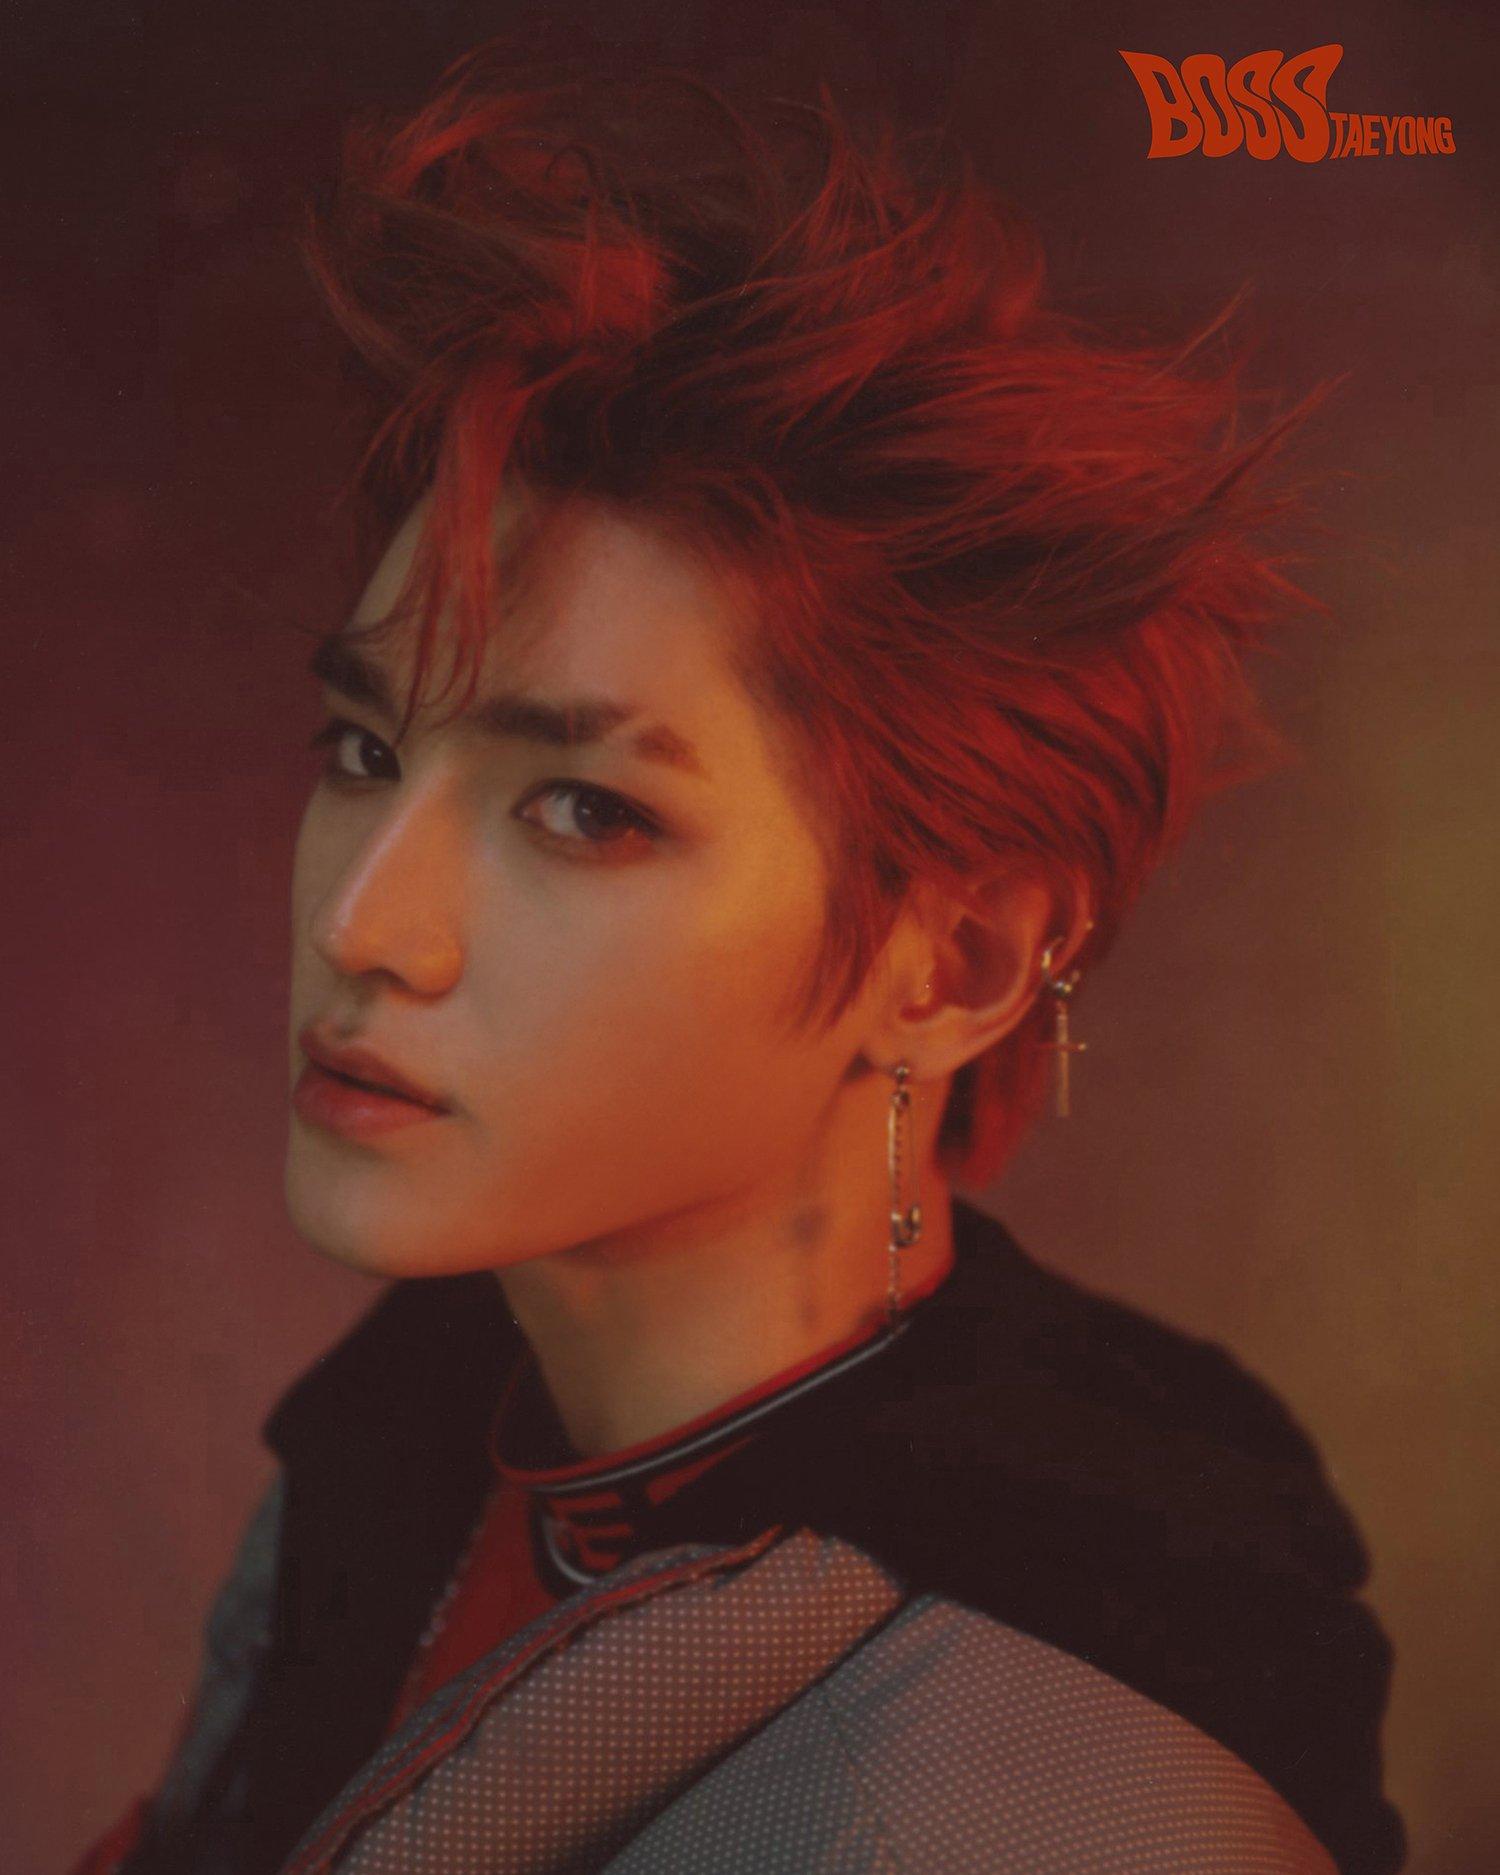 Update: NCT U Reveals Individual Teaser Image For “Boss”